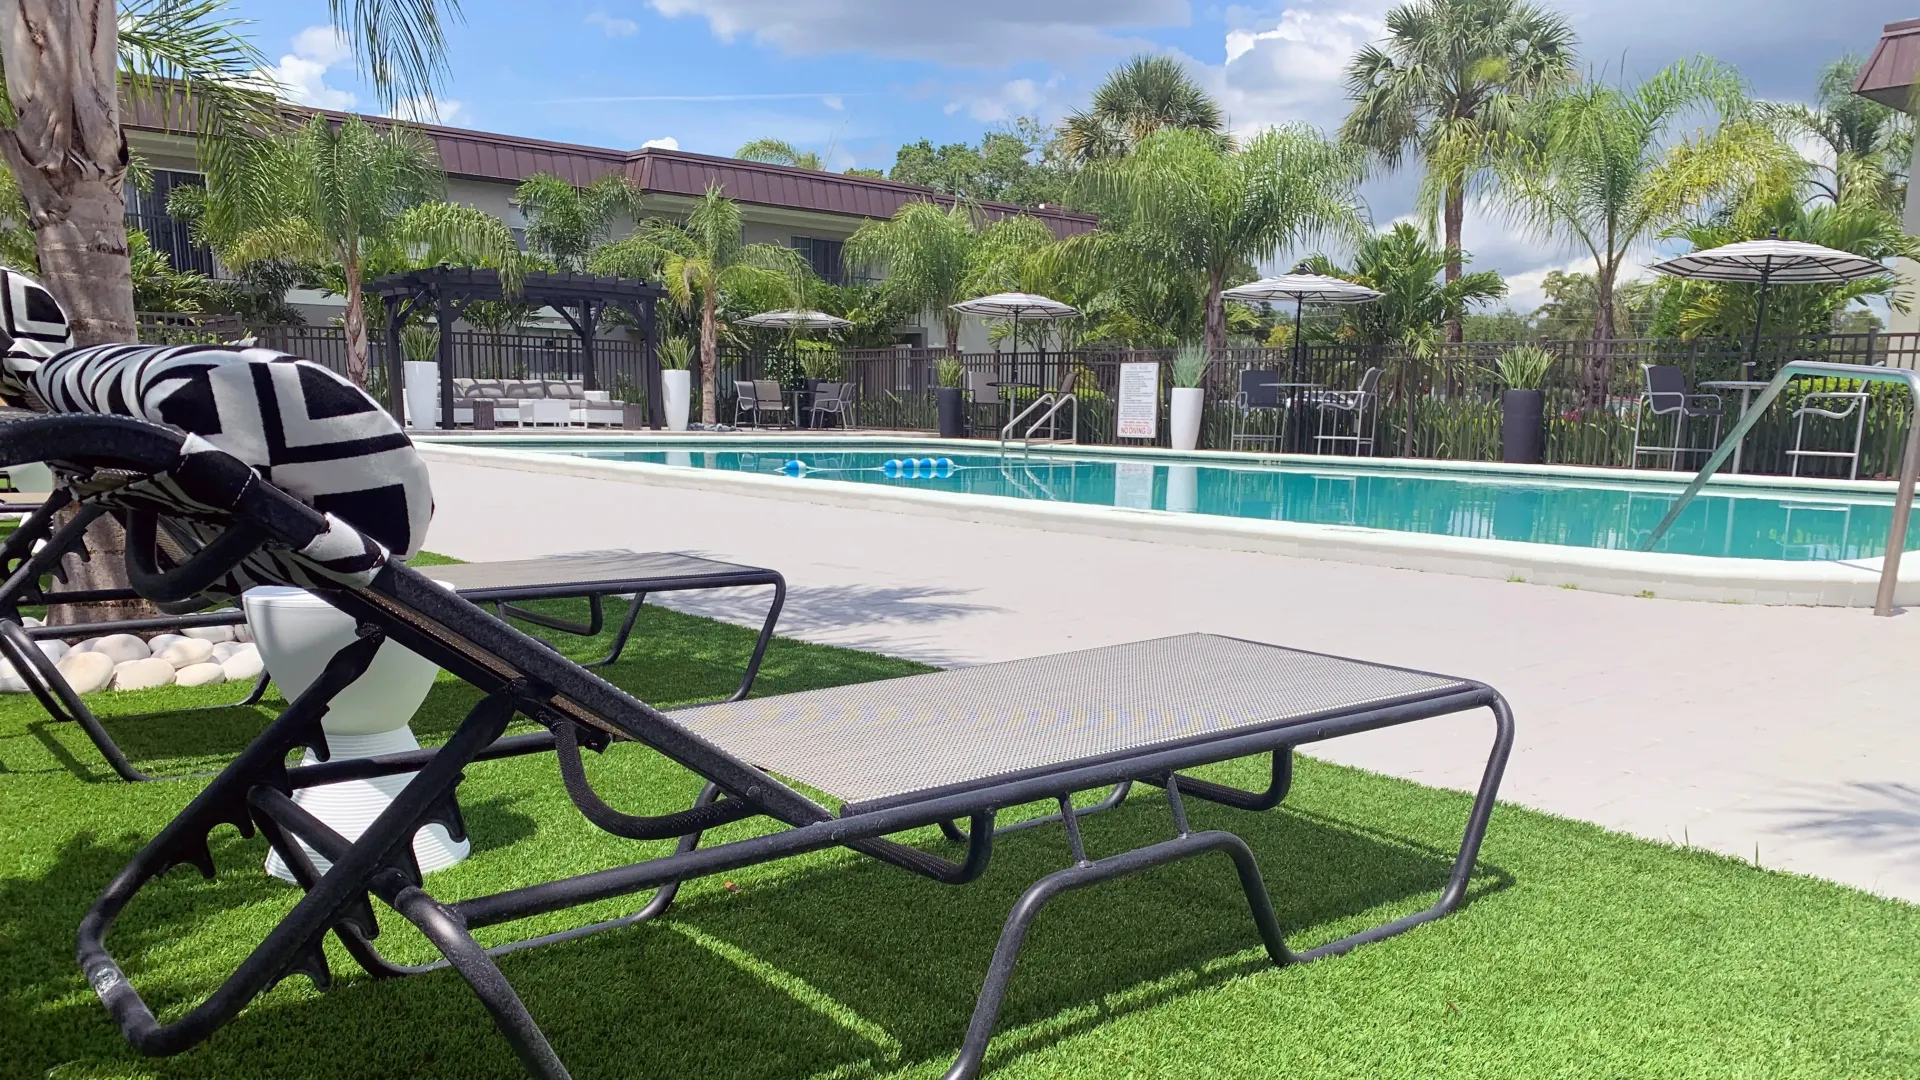 A glistening pool with comfortable seating options around the pool deck, conveniently positioned near apartment buildings.